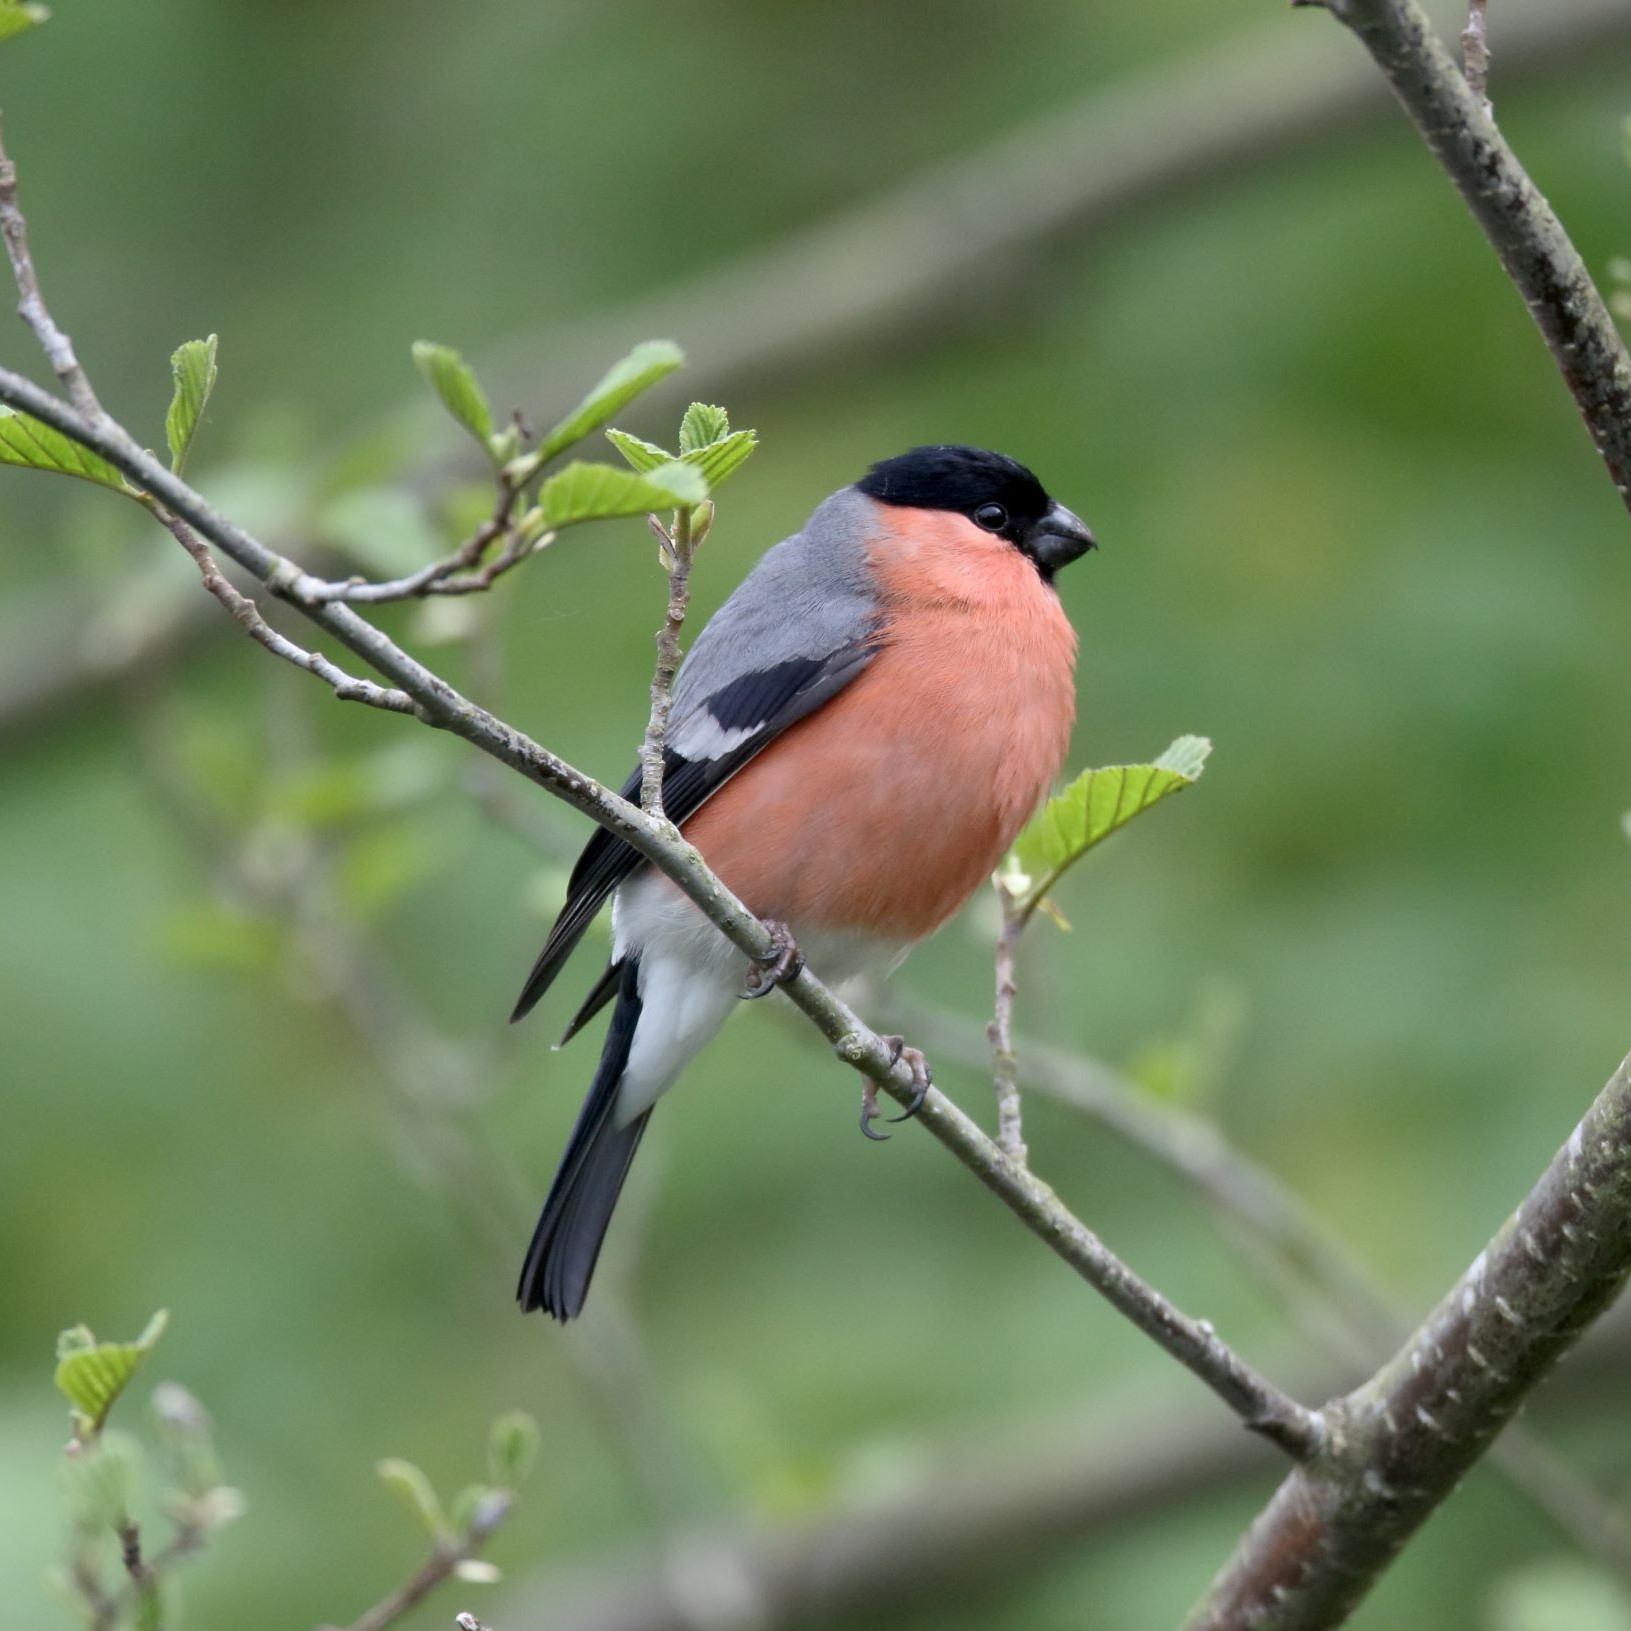 Close up of a Bullfinch perched on a tree branch